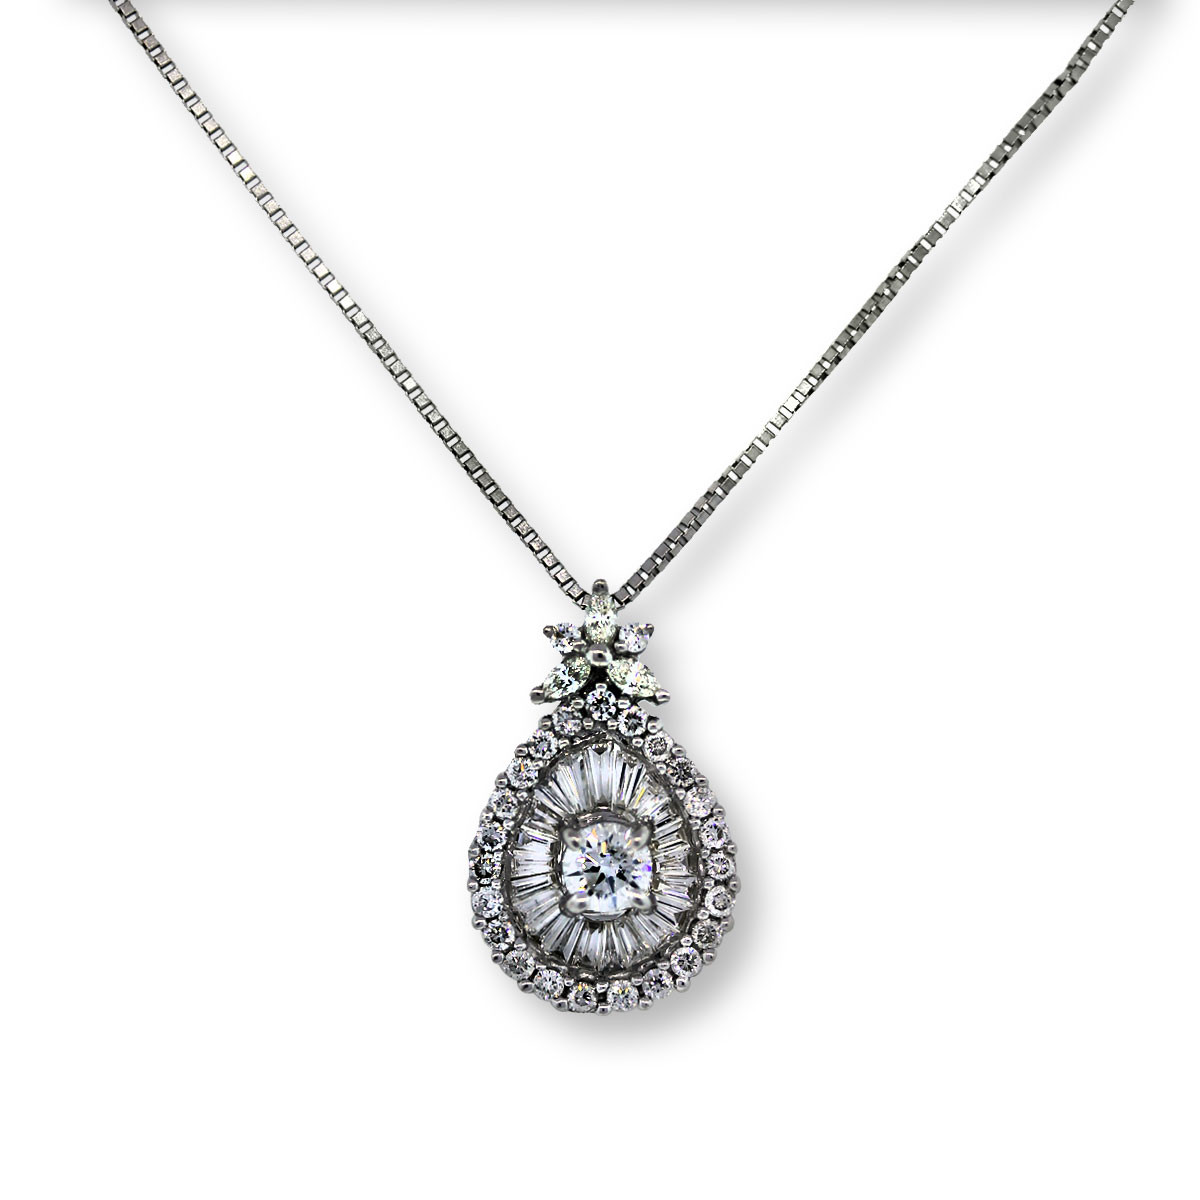 White Gold Necklace With Pendant
 14k White Gold Teardrop Diamond Necklace